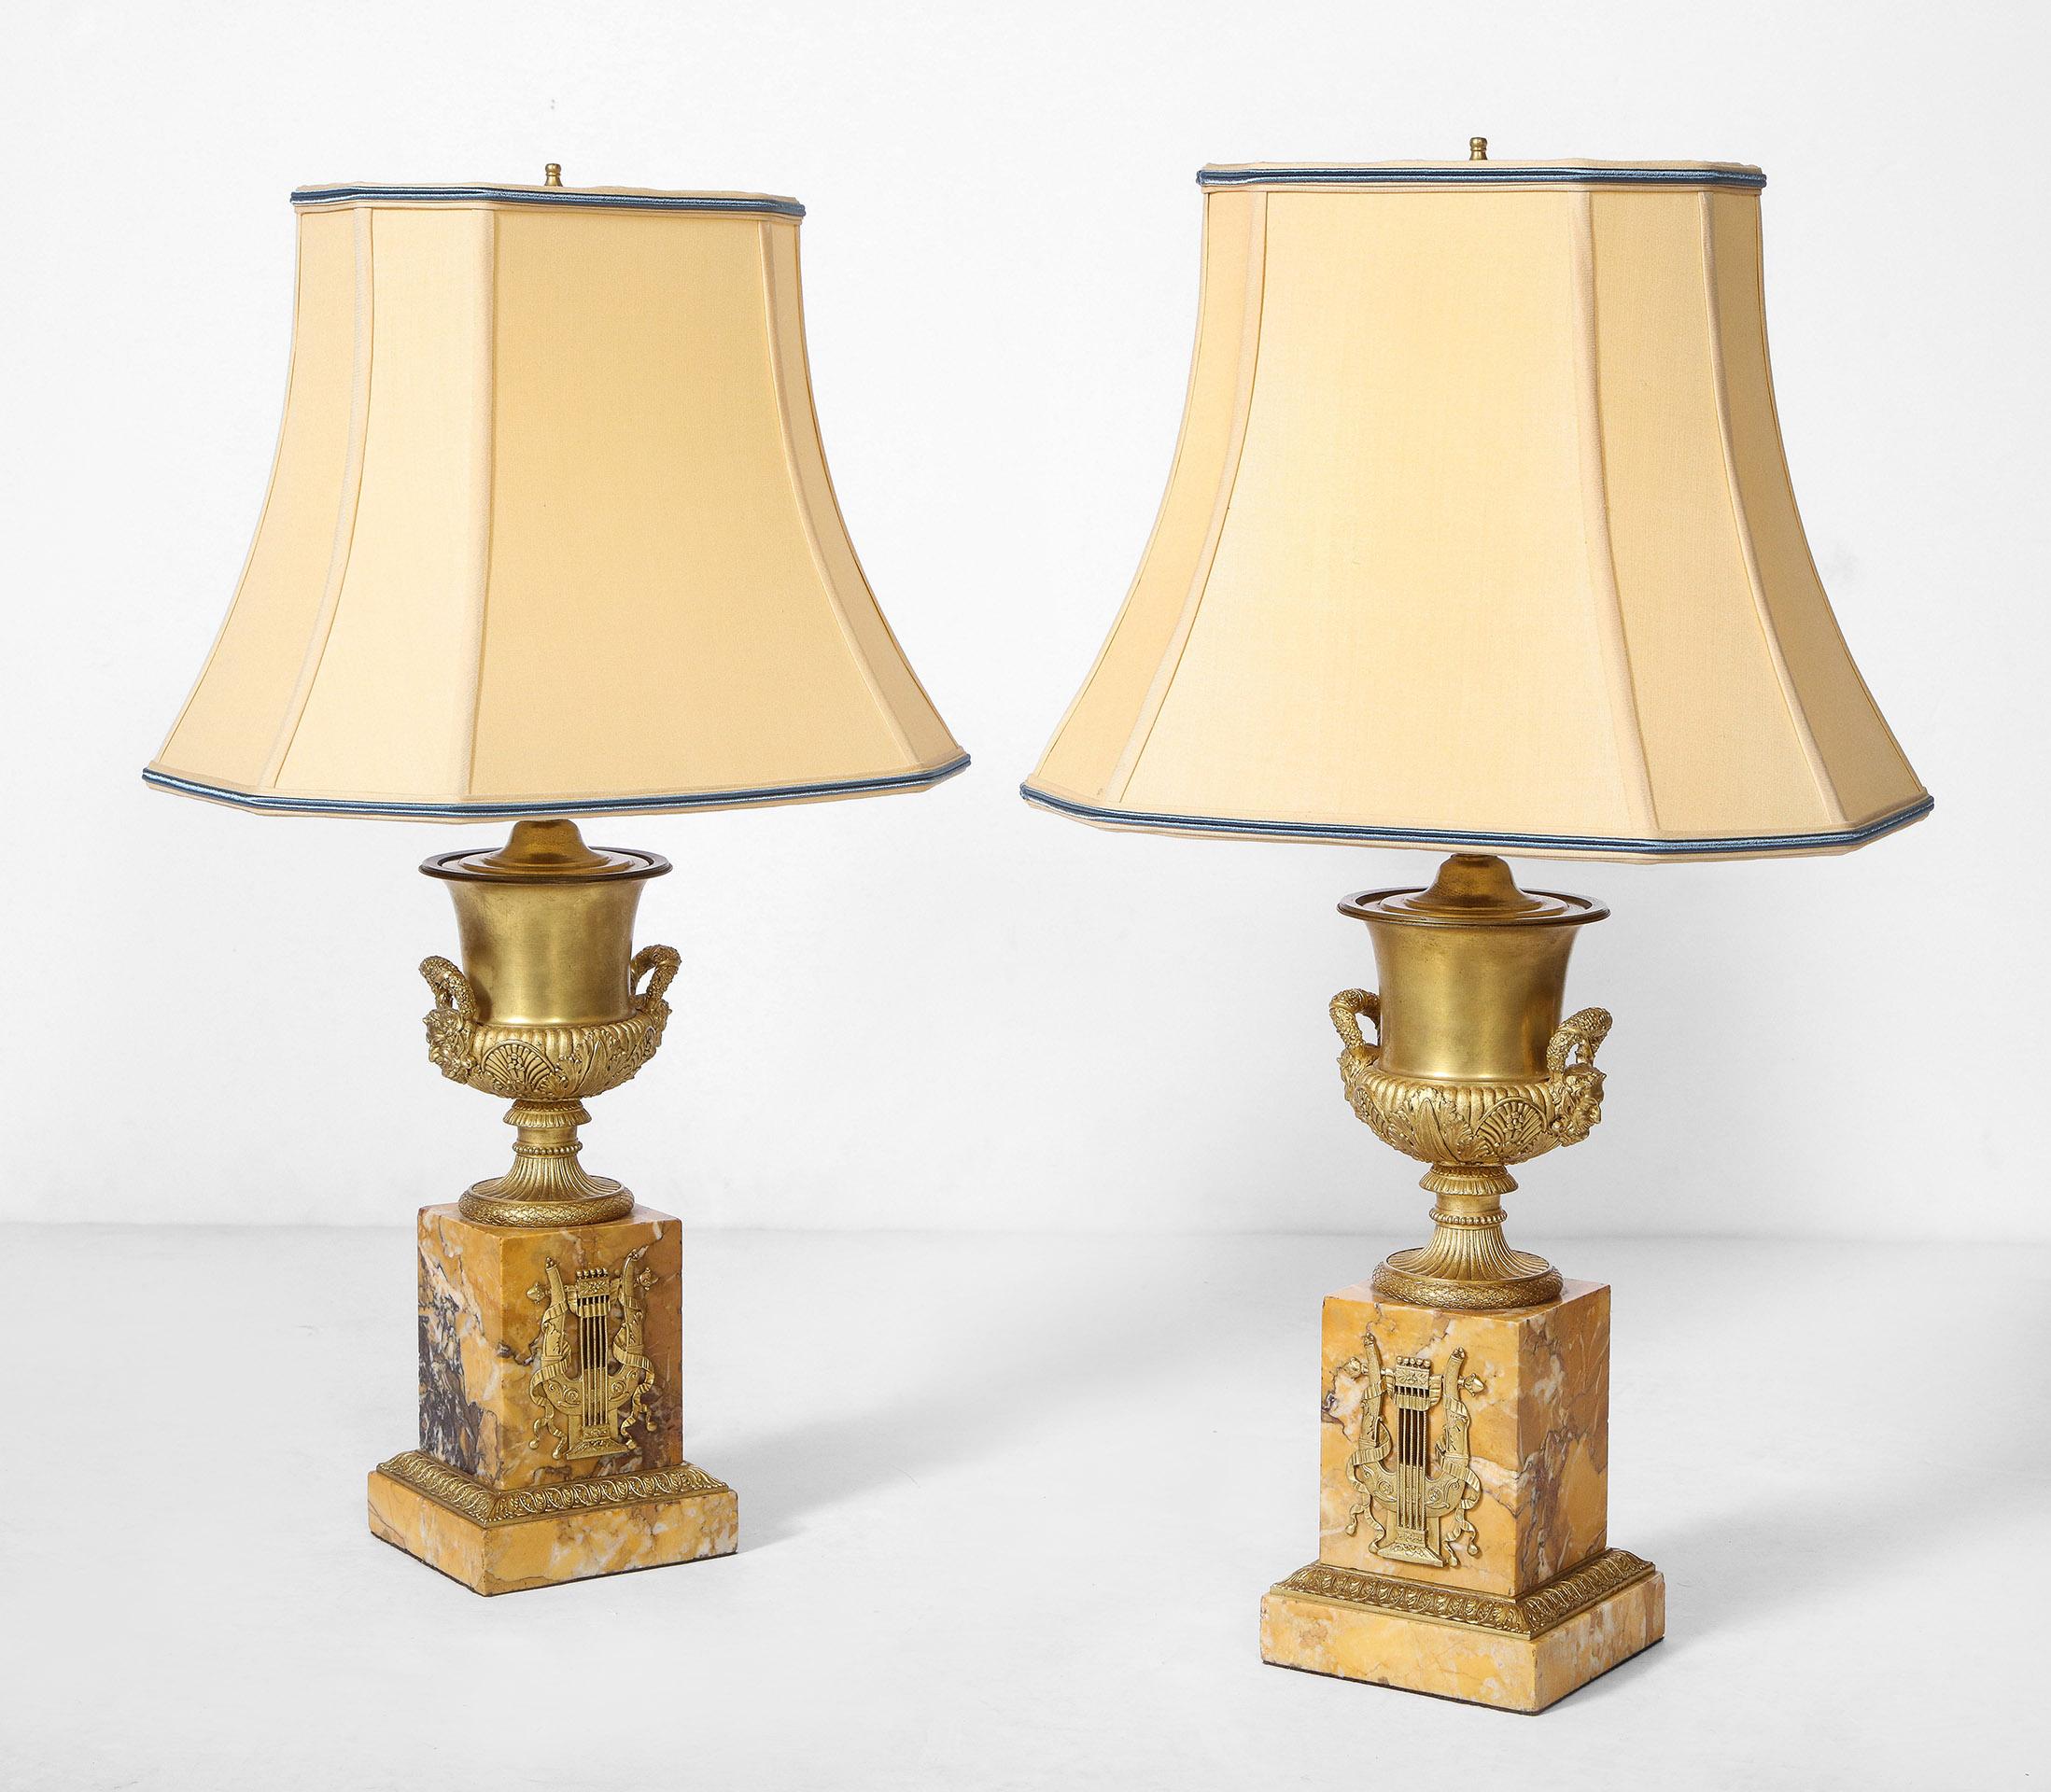 Pair of French Empire style bronze urn lamps

Pair of French Empire style bronze urns converted to lamps. The doré bronze urns with embossed neoclassic motifs on sienna marble bases with lyre appliqué.

The lamps have been recently wired.